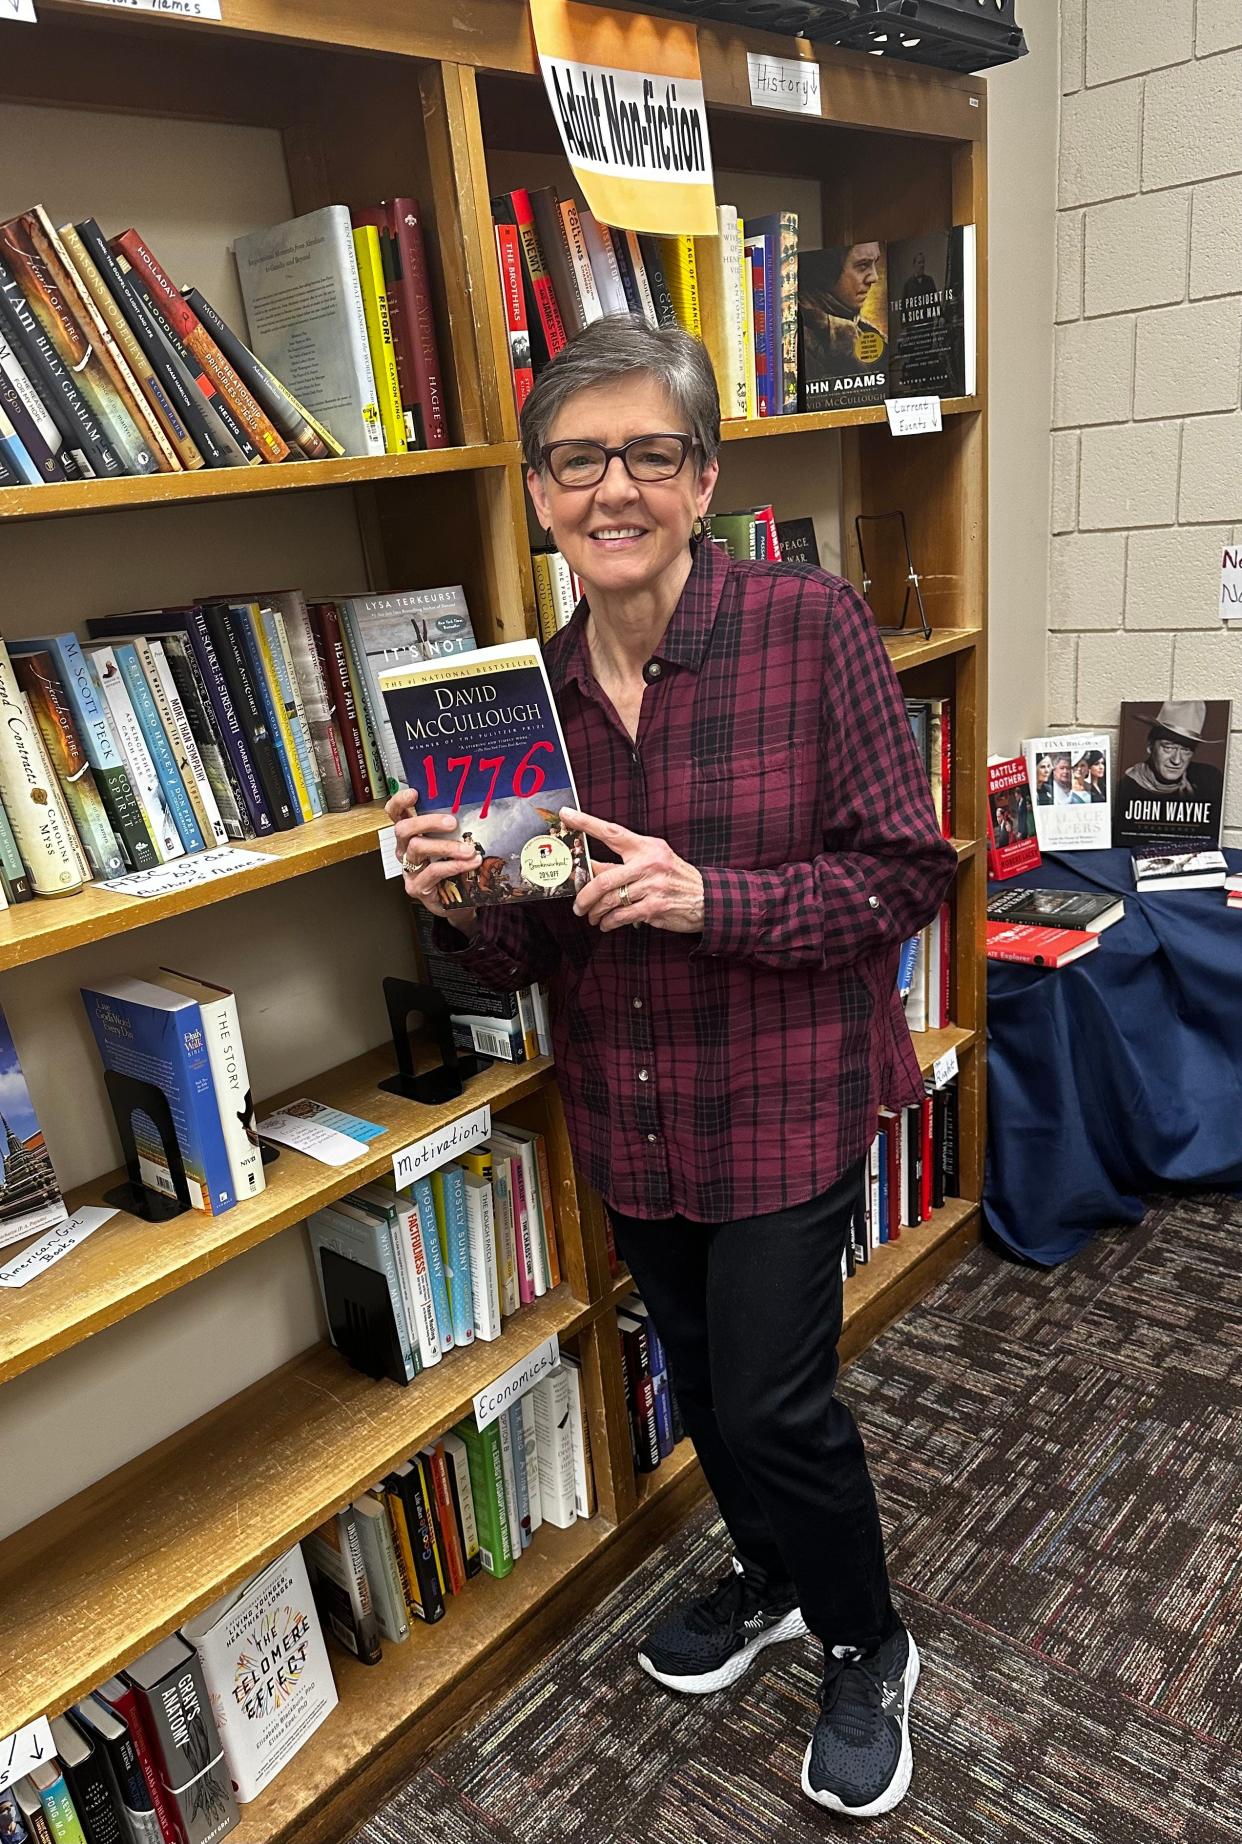 Jann Ford, president of the Friends of the Cleveland County Library System, holds up one of the books available at the pop-up book sale.